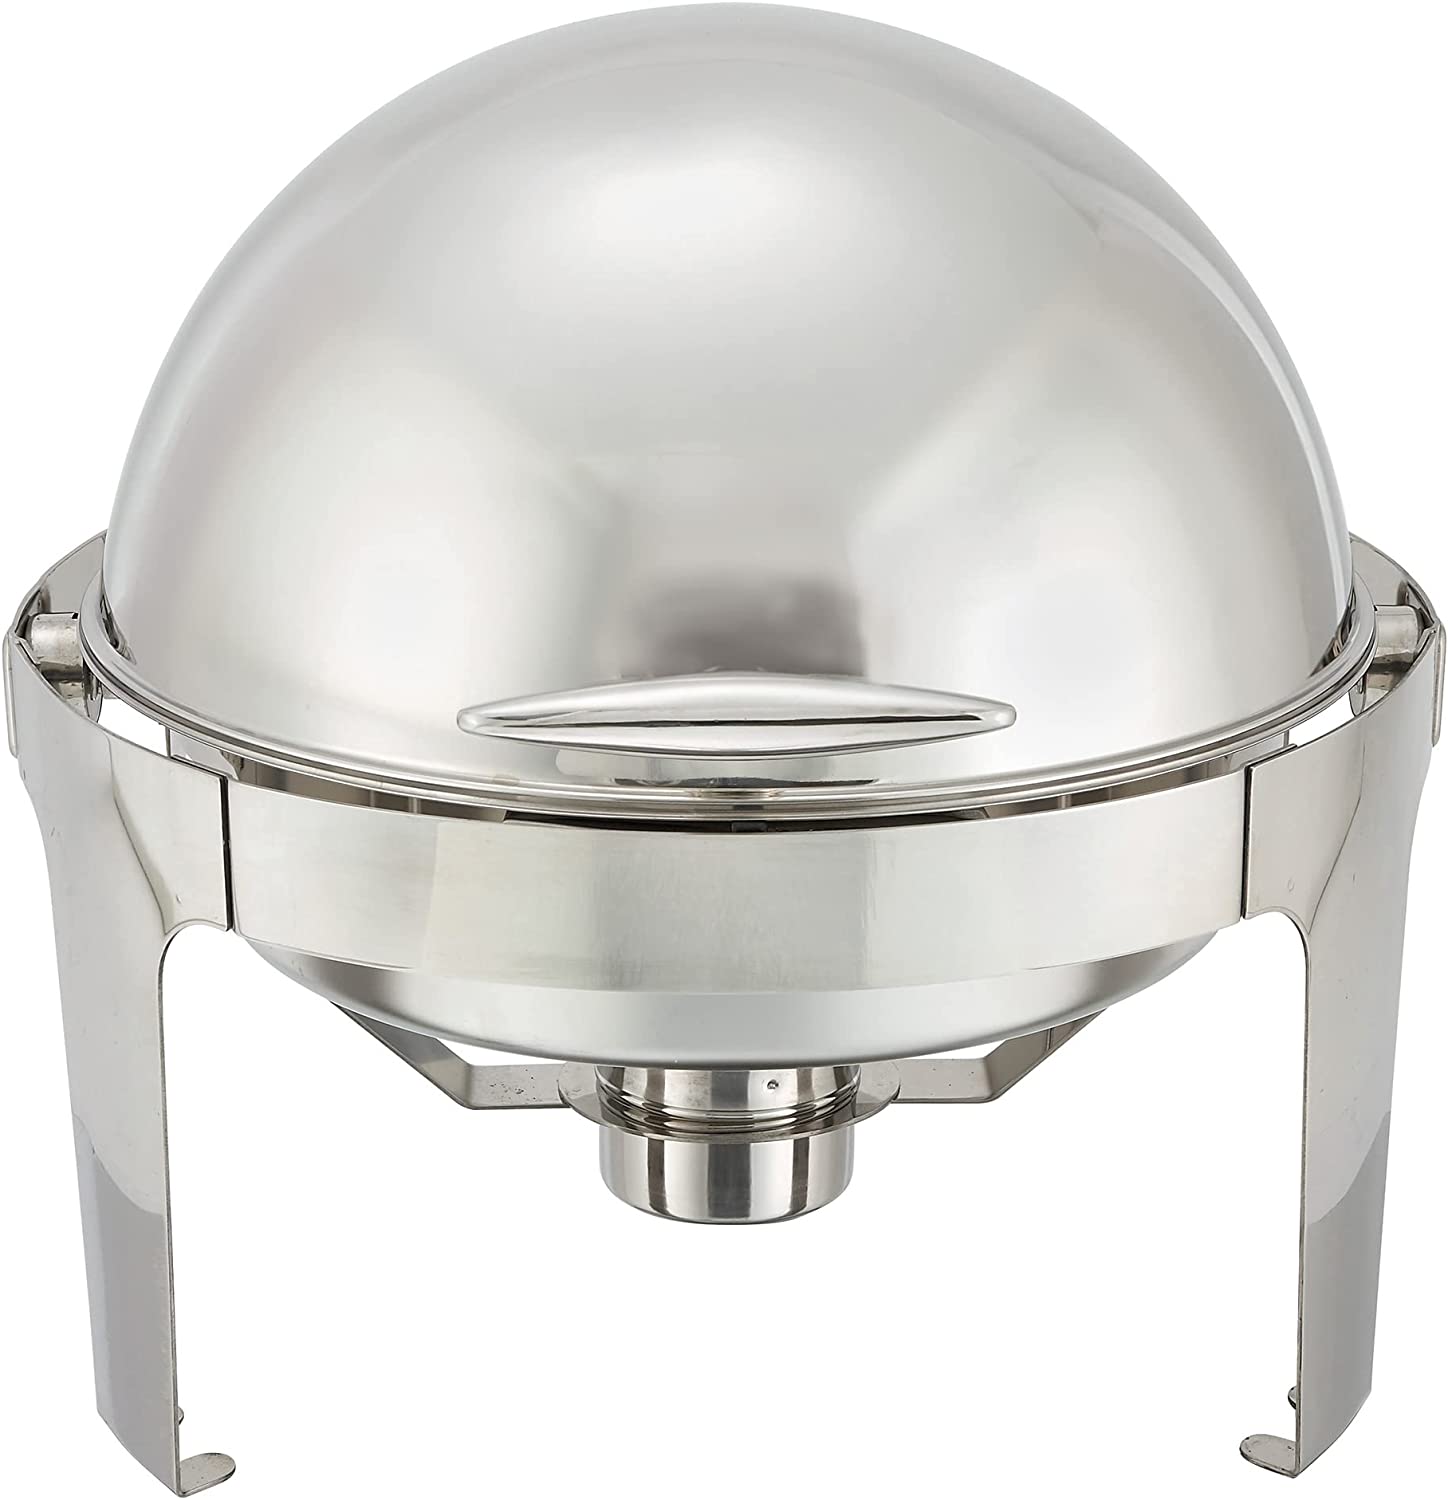 11'' Stainless Steel Round Serving Tray Tortilla Warmer With Handle